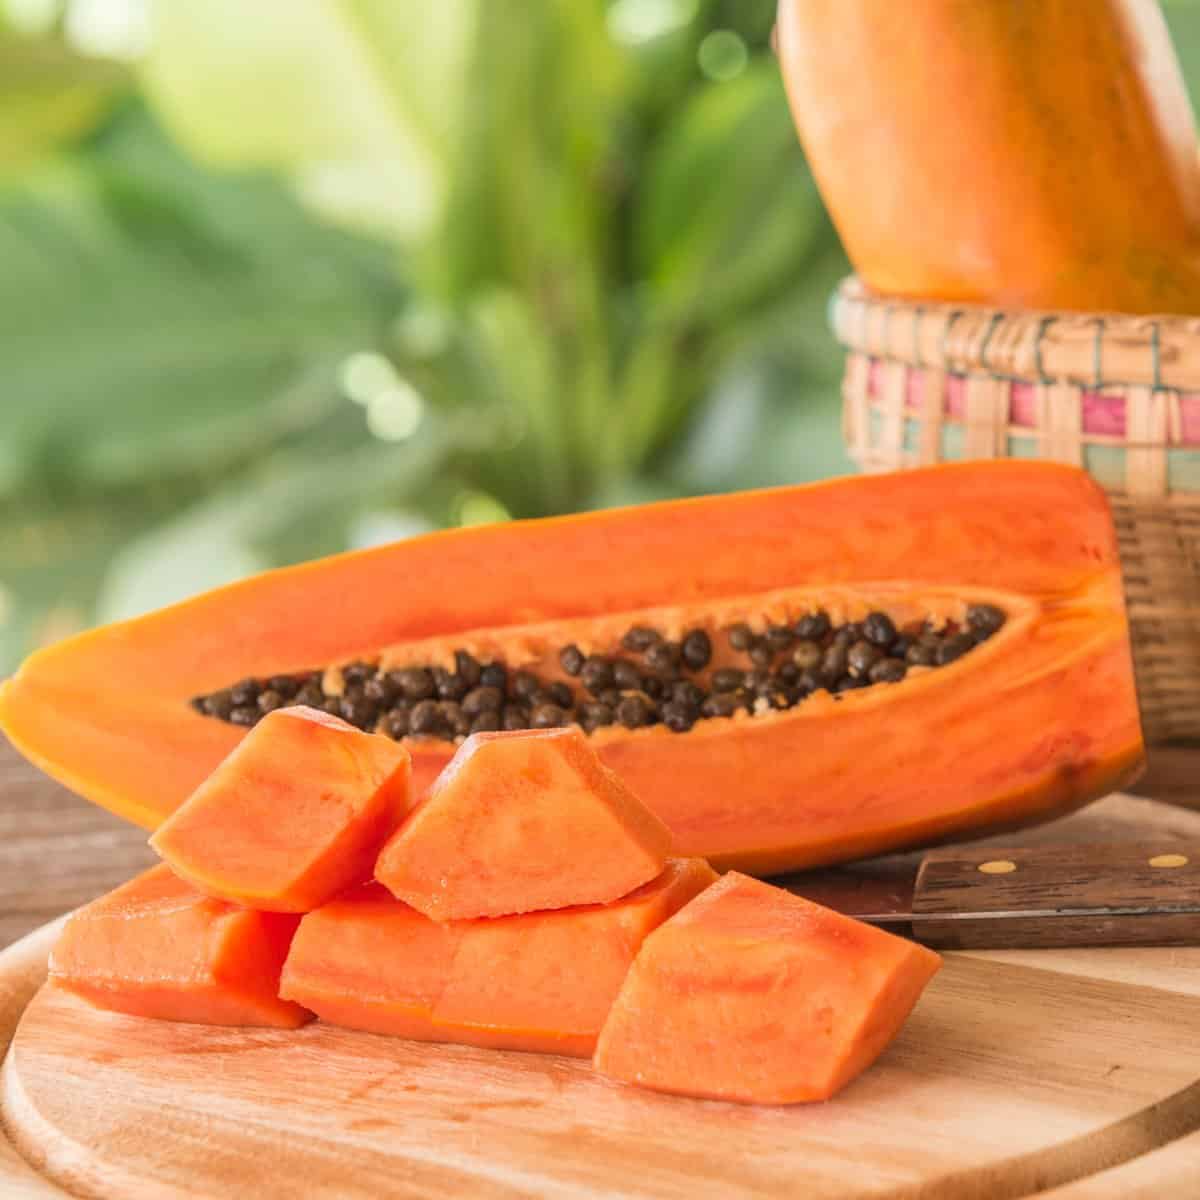 How to cook with papaya